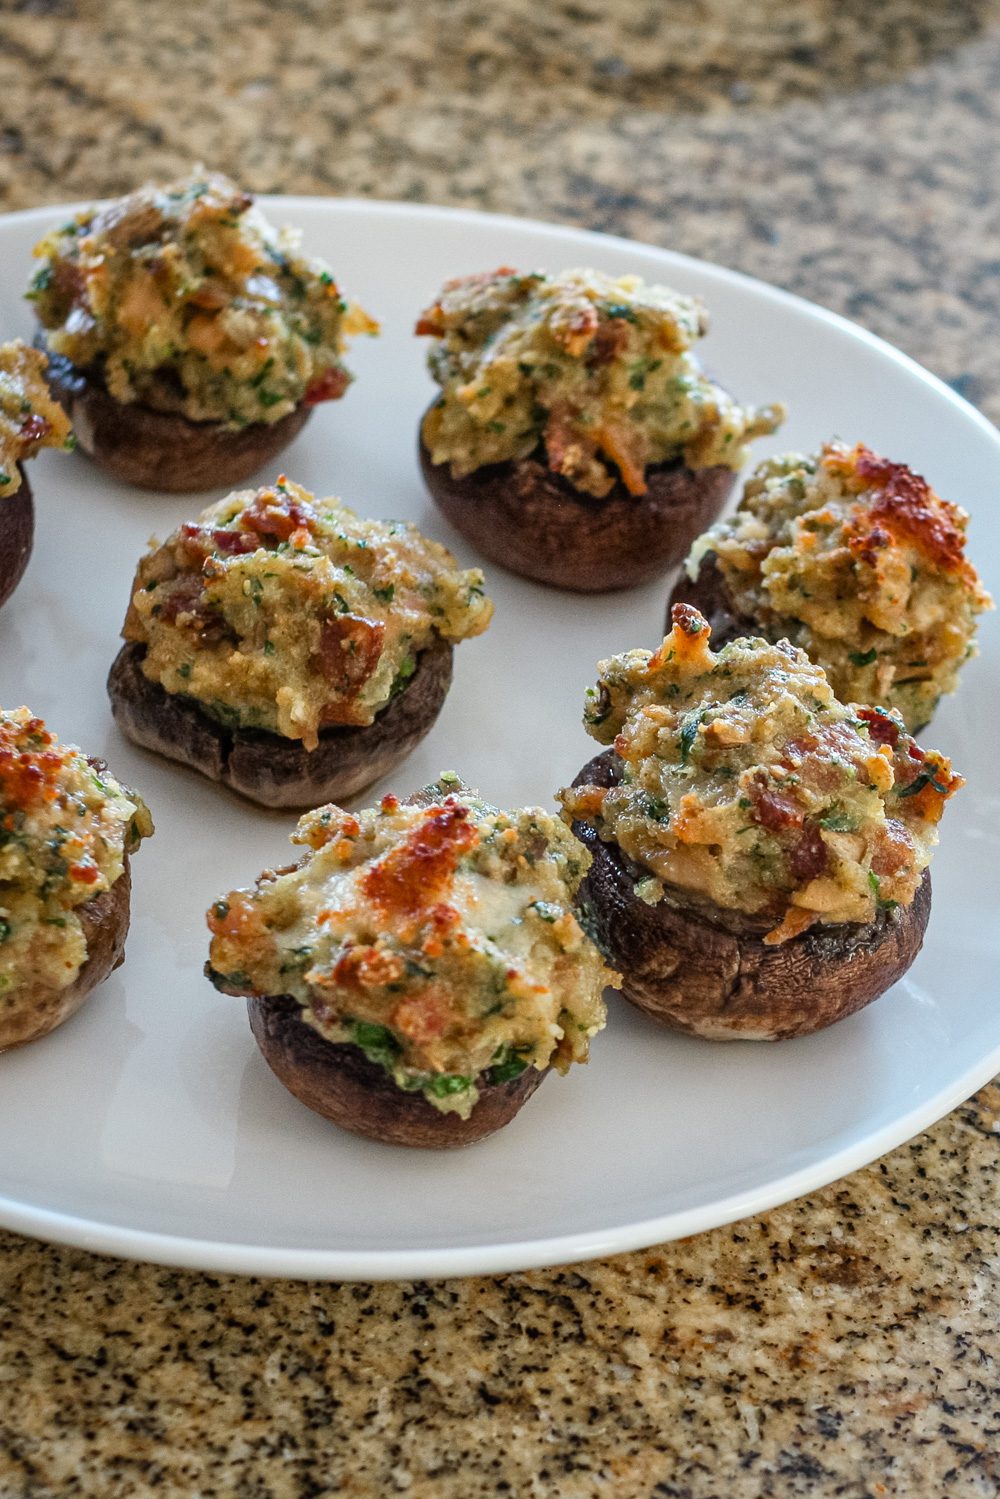 stuffed mushrooms with clams casino filling on a serving plate